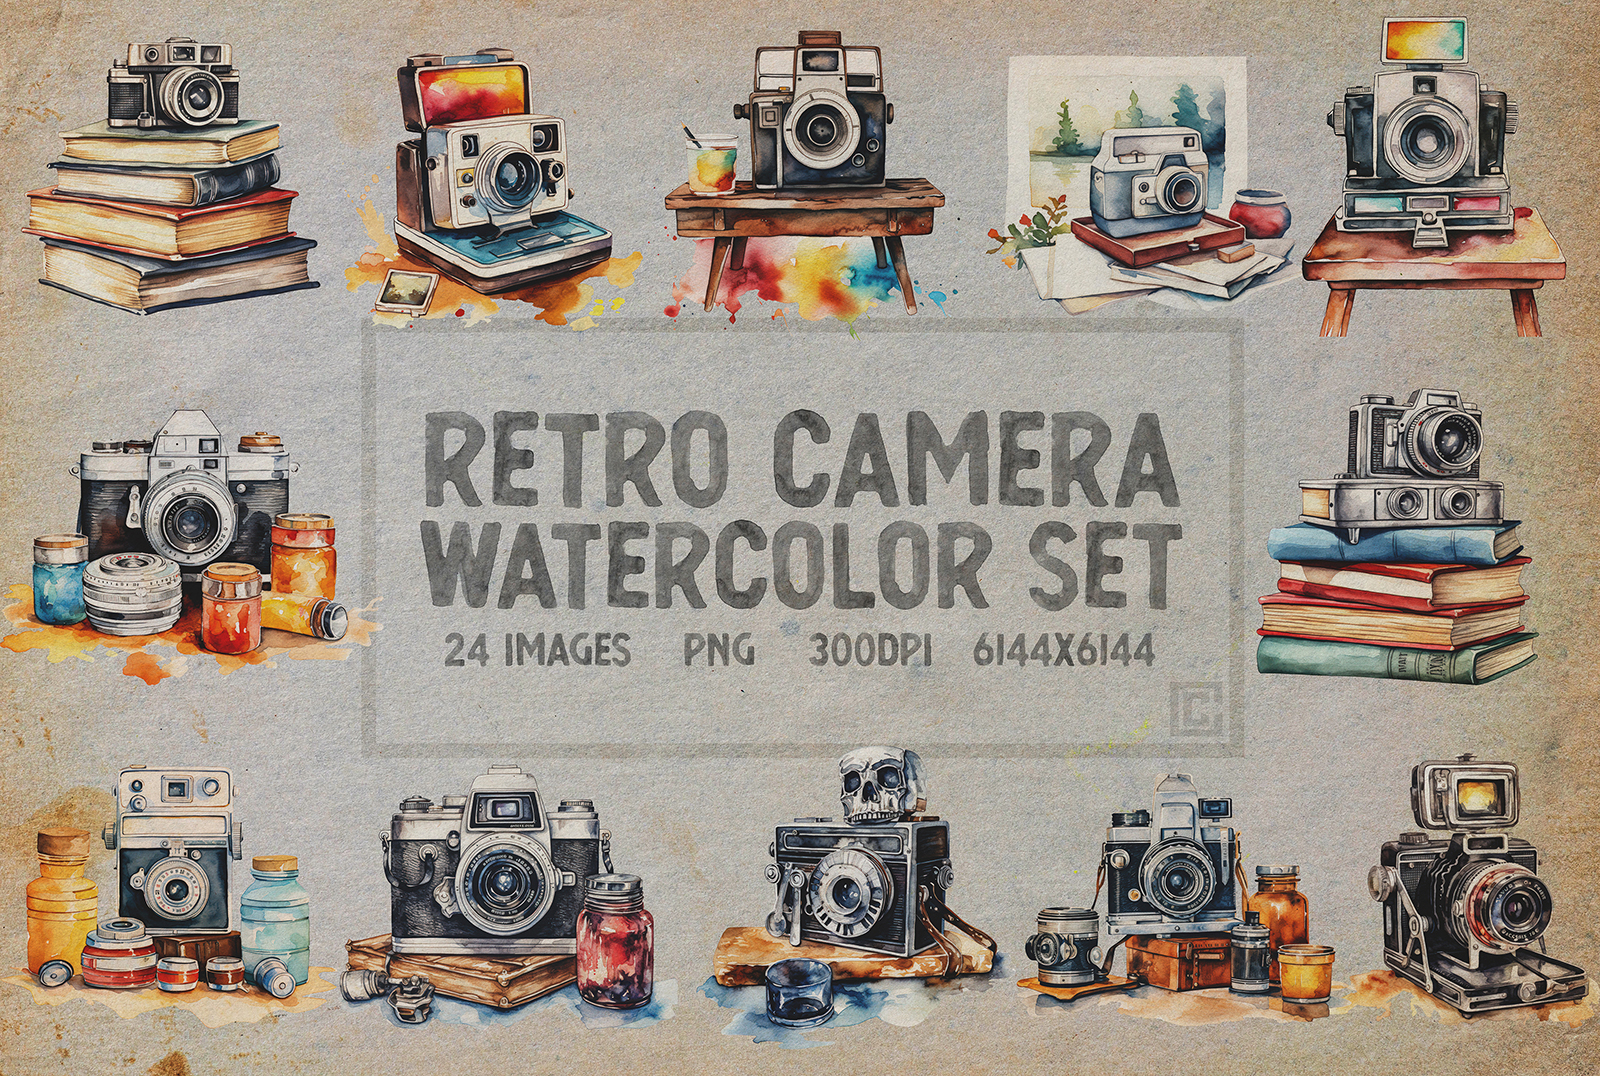 Retro Vintage Camera Watercolor Package with Transparent PNGs